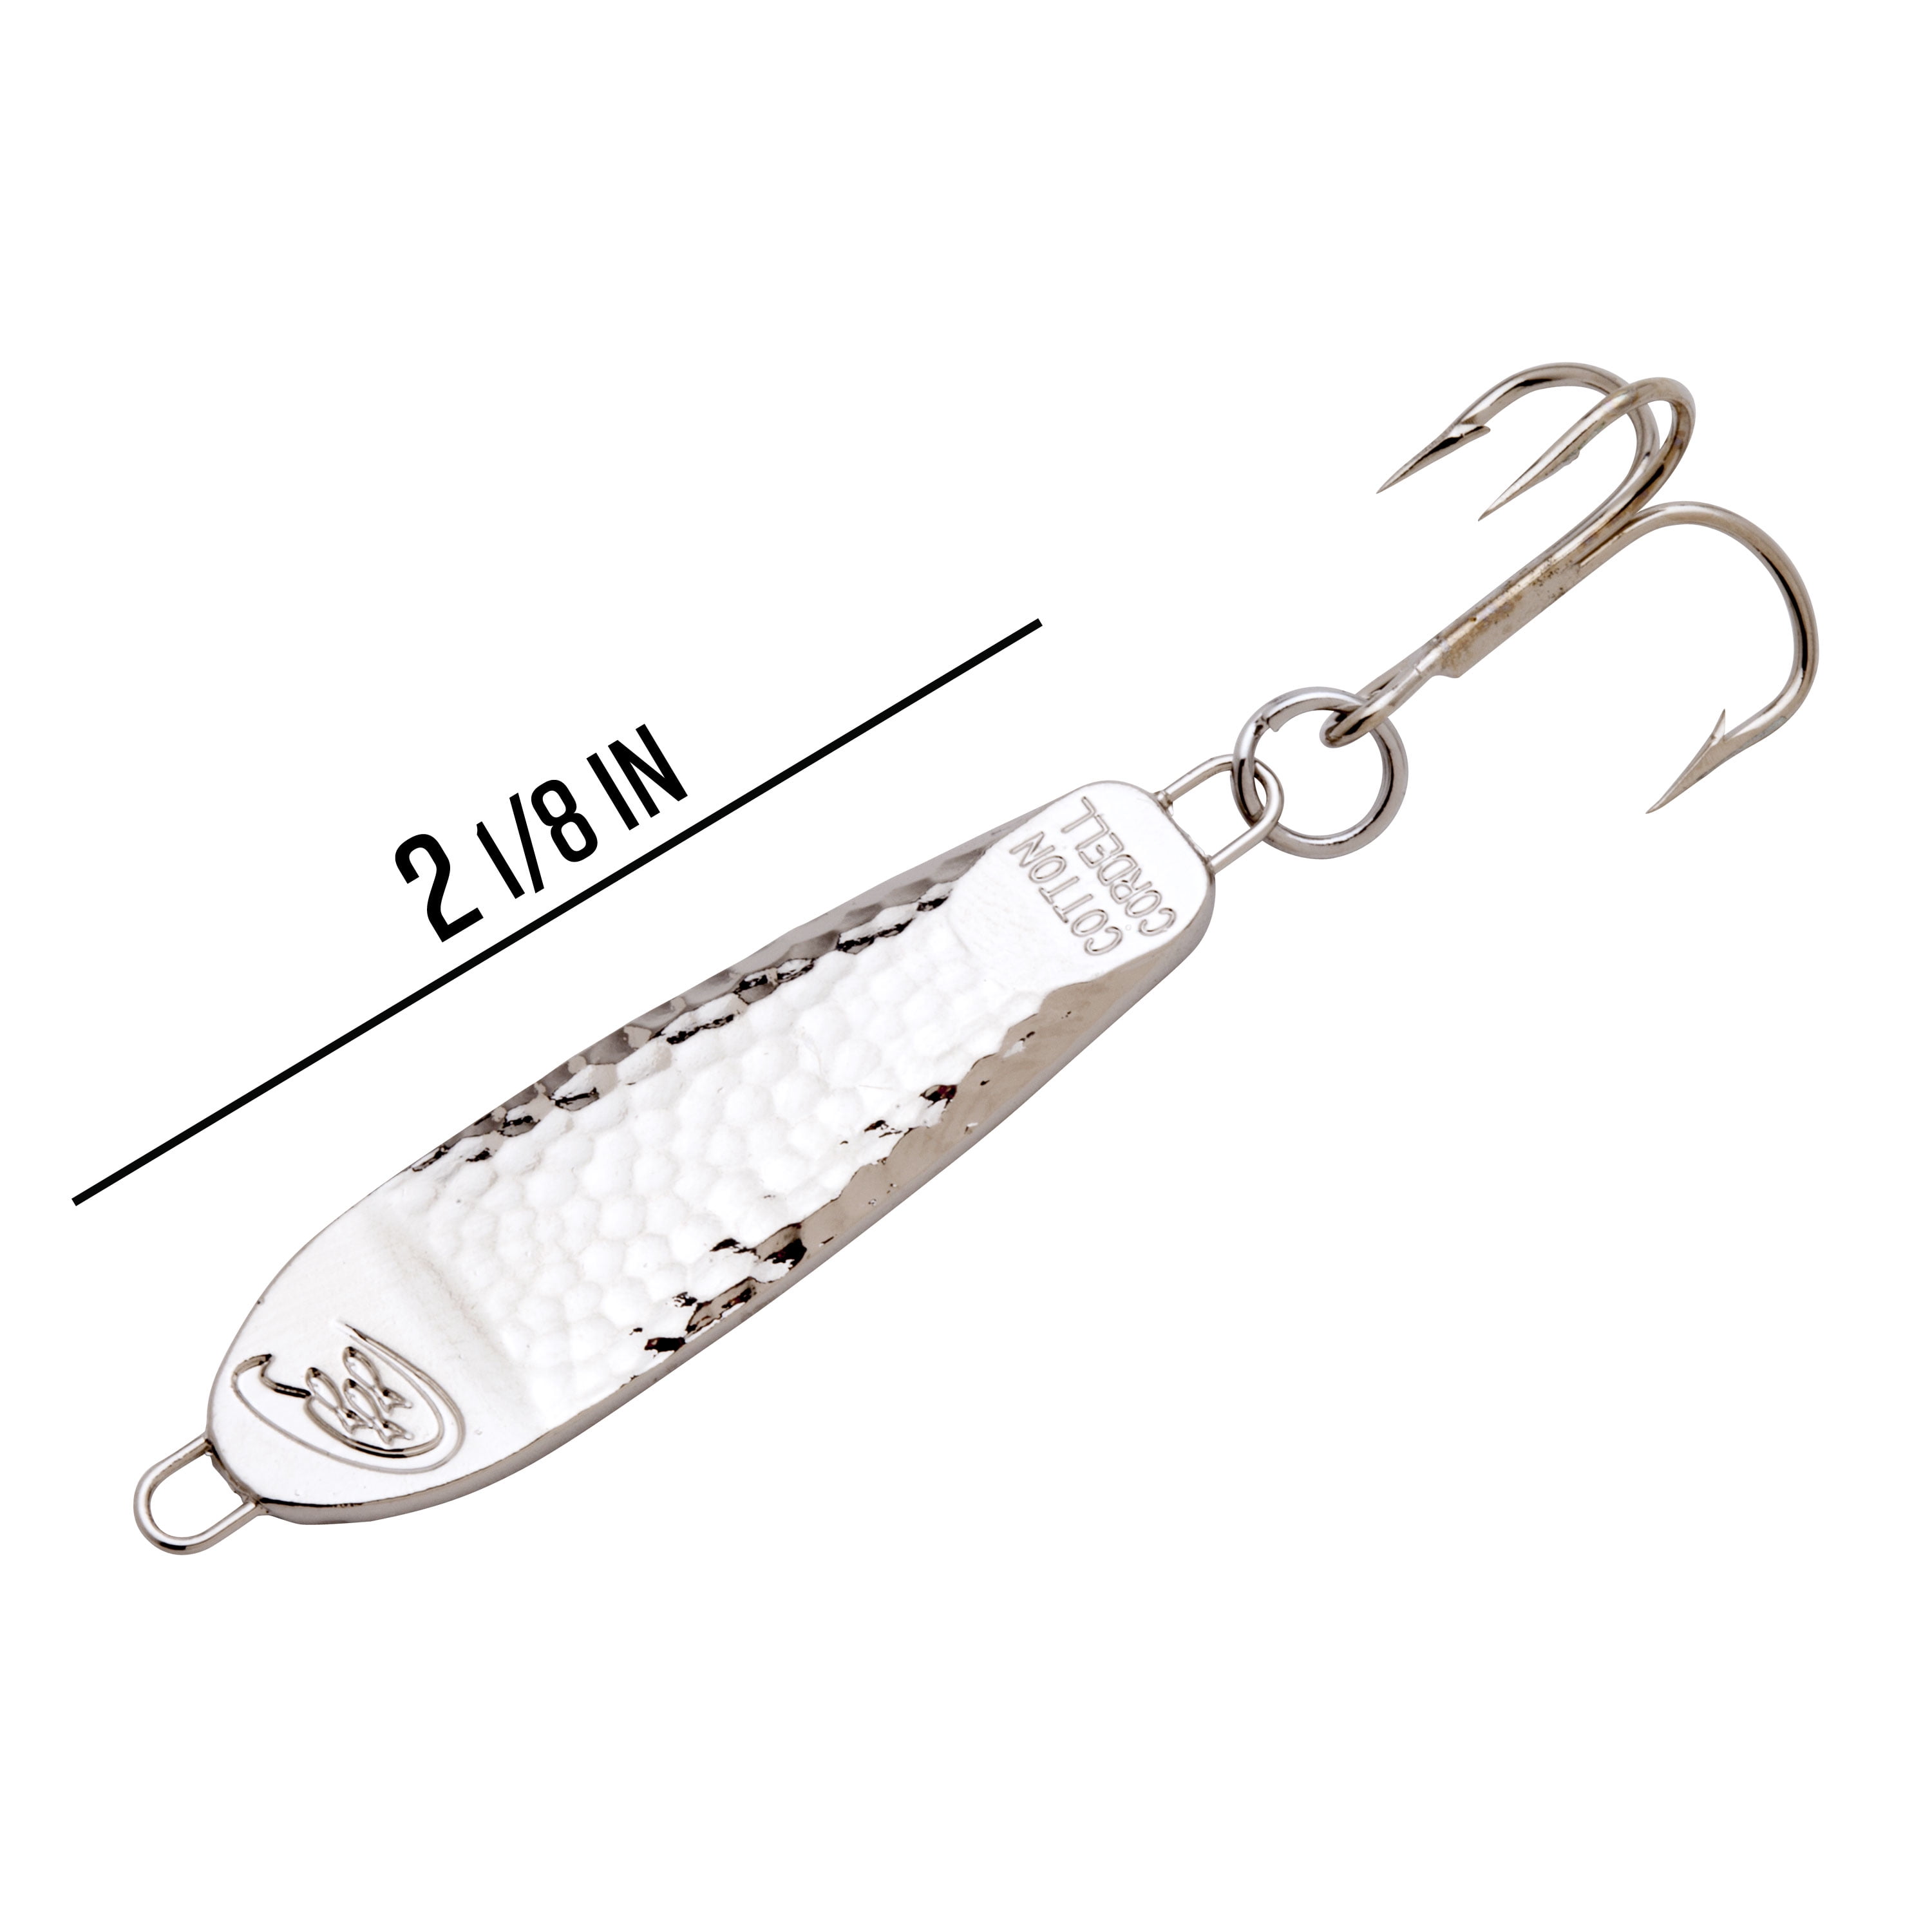 1/2 Tungsten Silver Jigging Spoon - The Perfect Jig